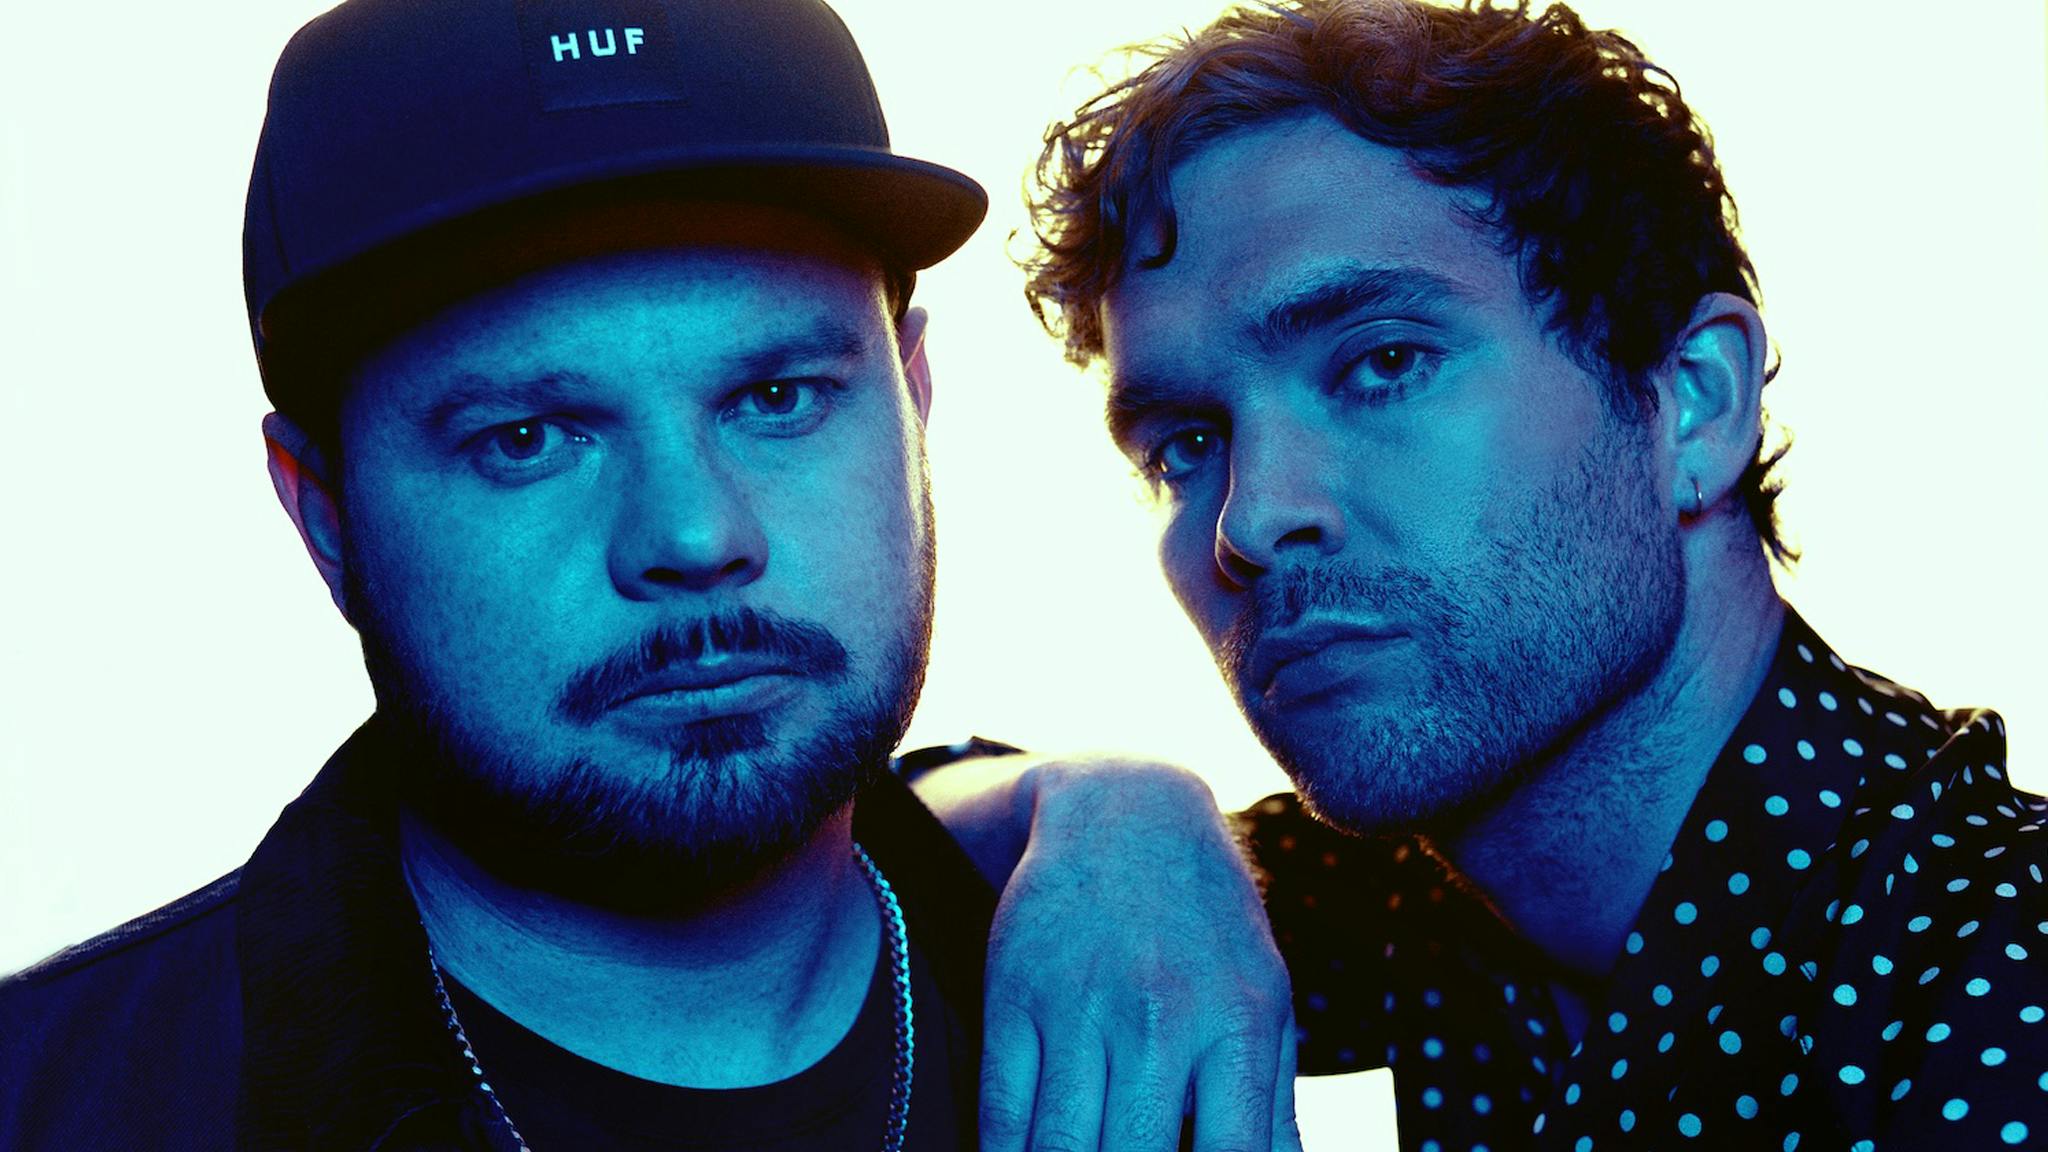 Royal Blood’s new album is at Number One in the UK midweek charts